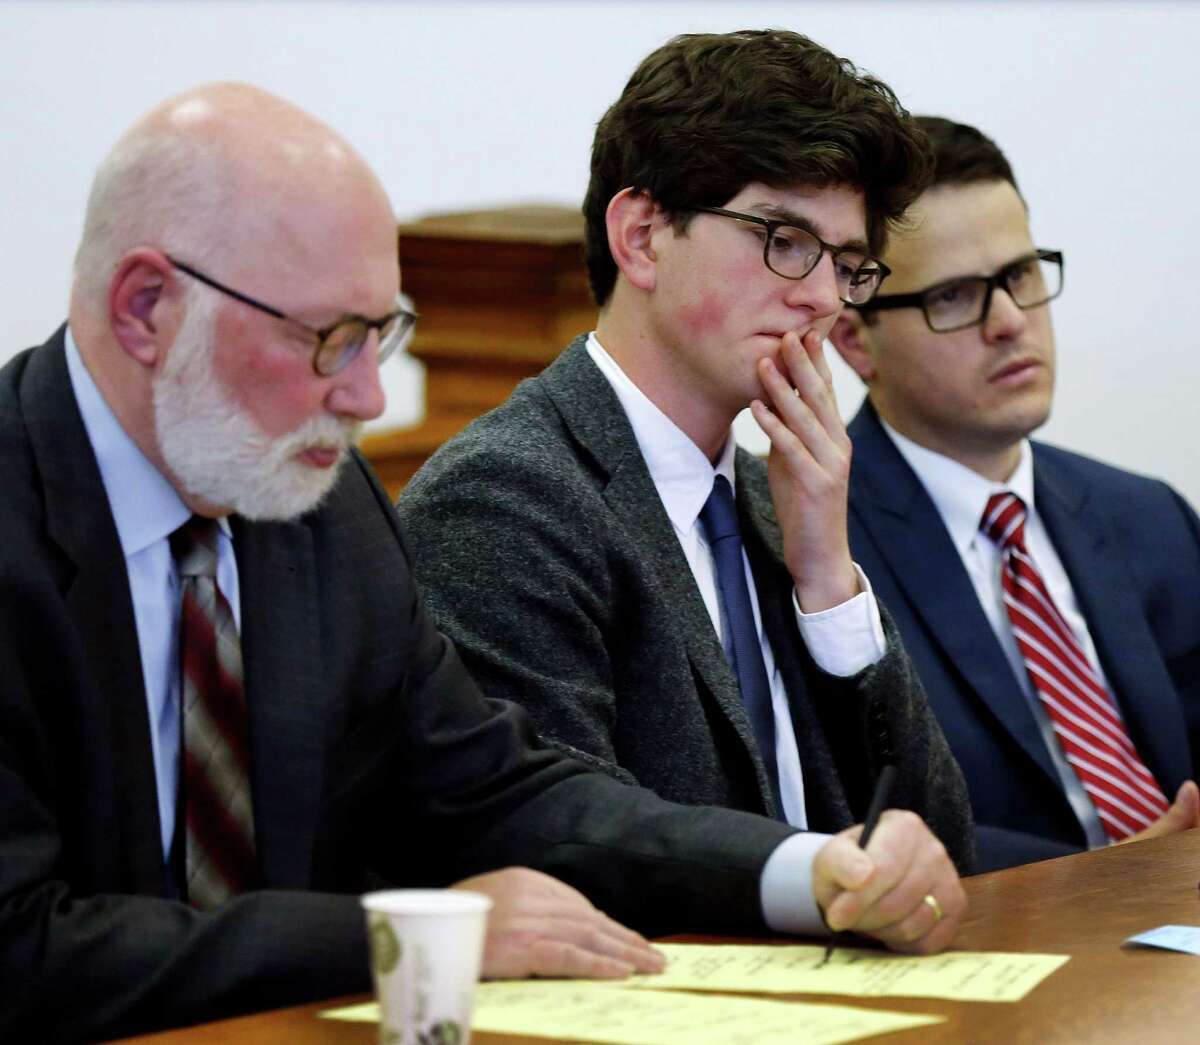 Owen Labrie, center, listens to a recorded statement from his victim with his lawyer J.W. Carney, left, and Sam Zaganjoir before being sentenced in Merrimack County Superior Court Thursday, Oct. 29, 2015, in Concord, N.H. The graduate of the exclusive St. Paul?’s School was sentenced to a year in jail for sexually assaulting a 15-year-old freshman girl as part of a tradition in which upperclassmen competed to rack up sexual conquests. Labrie was allowed to remain free on bail while he appeals his conviction. (AP Photo/Jim Cole, Pool)